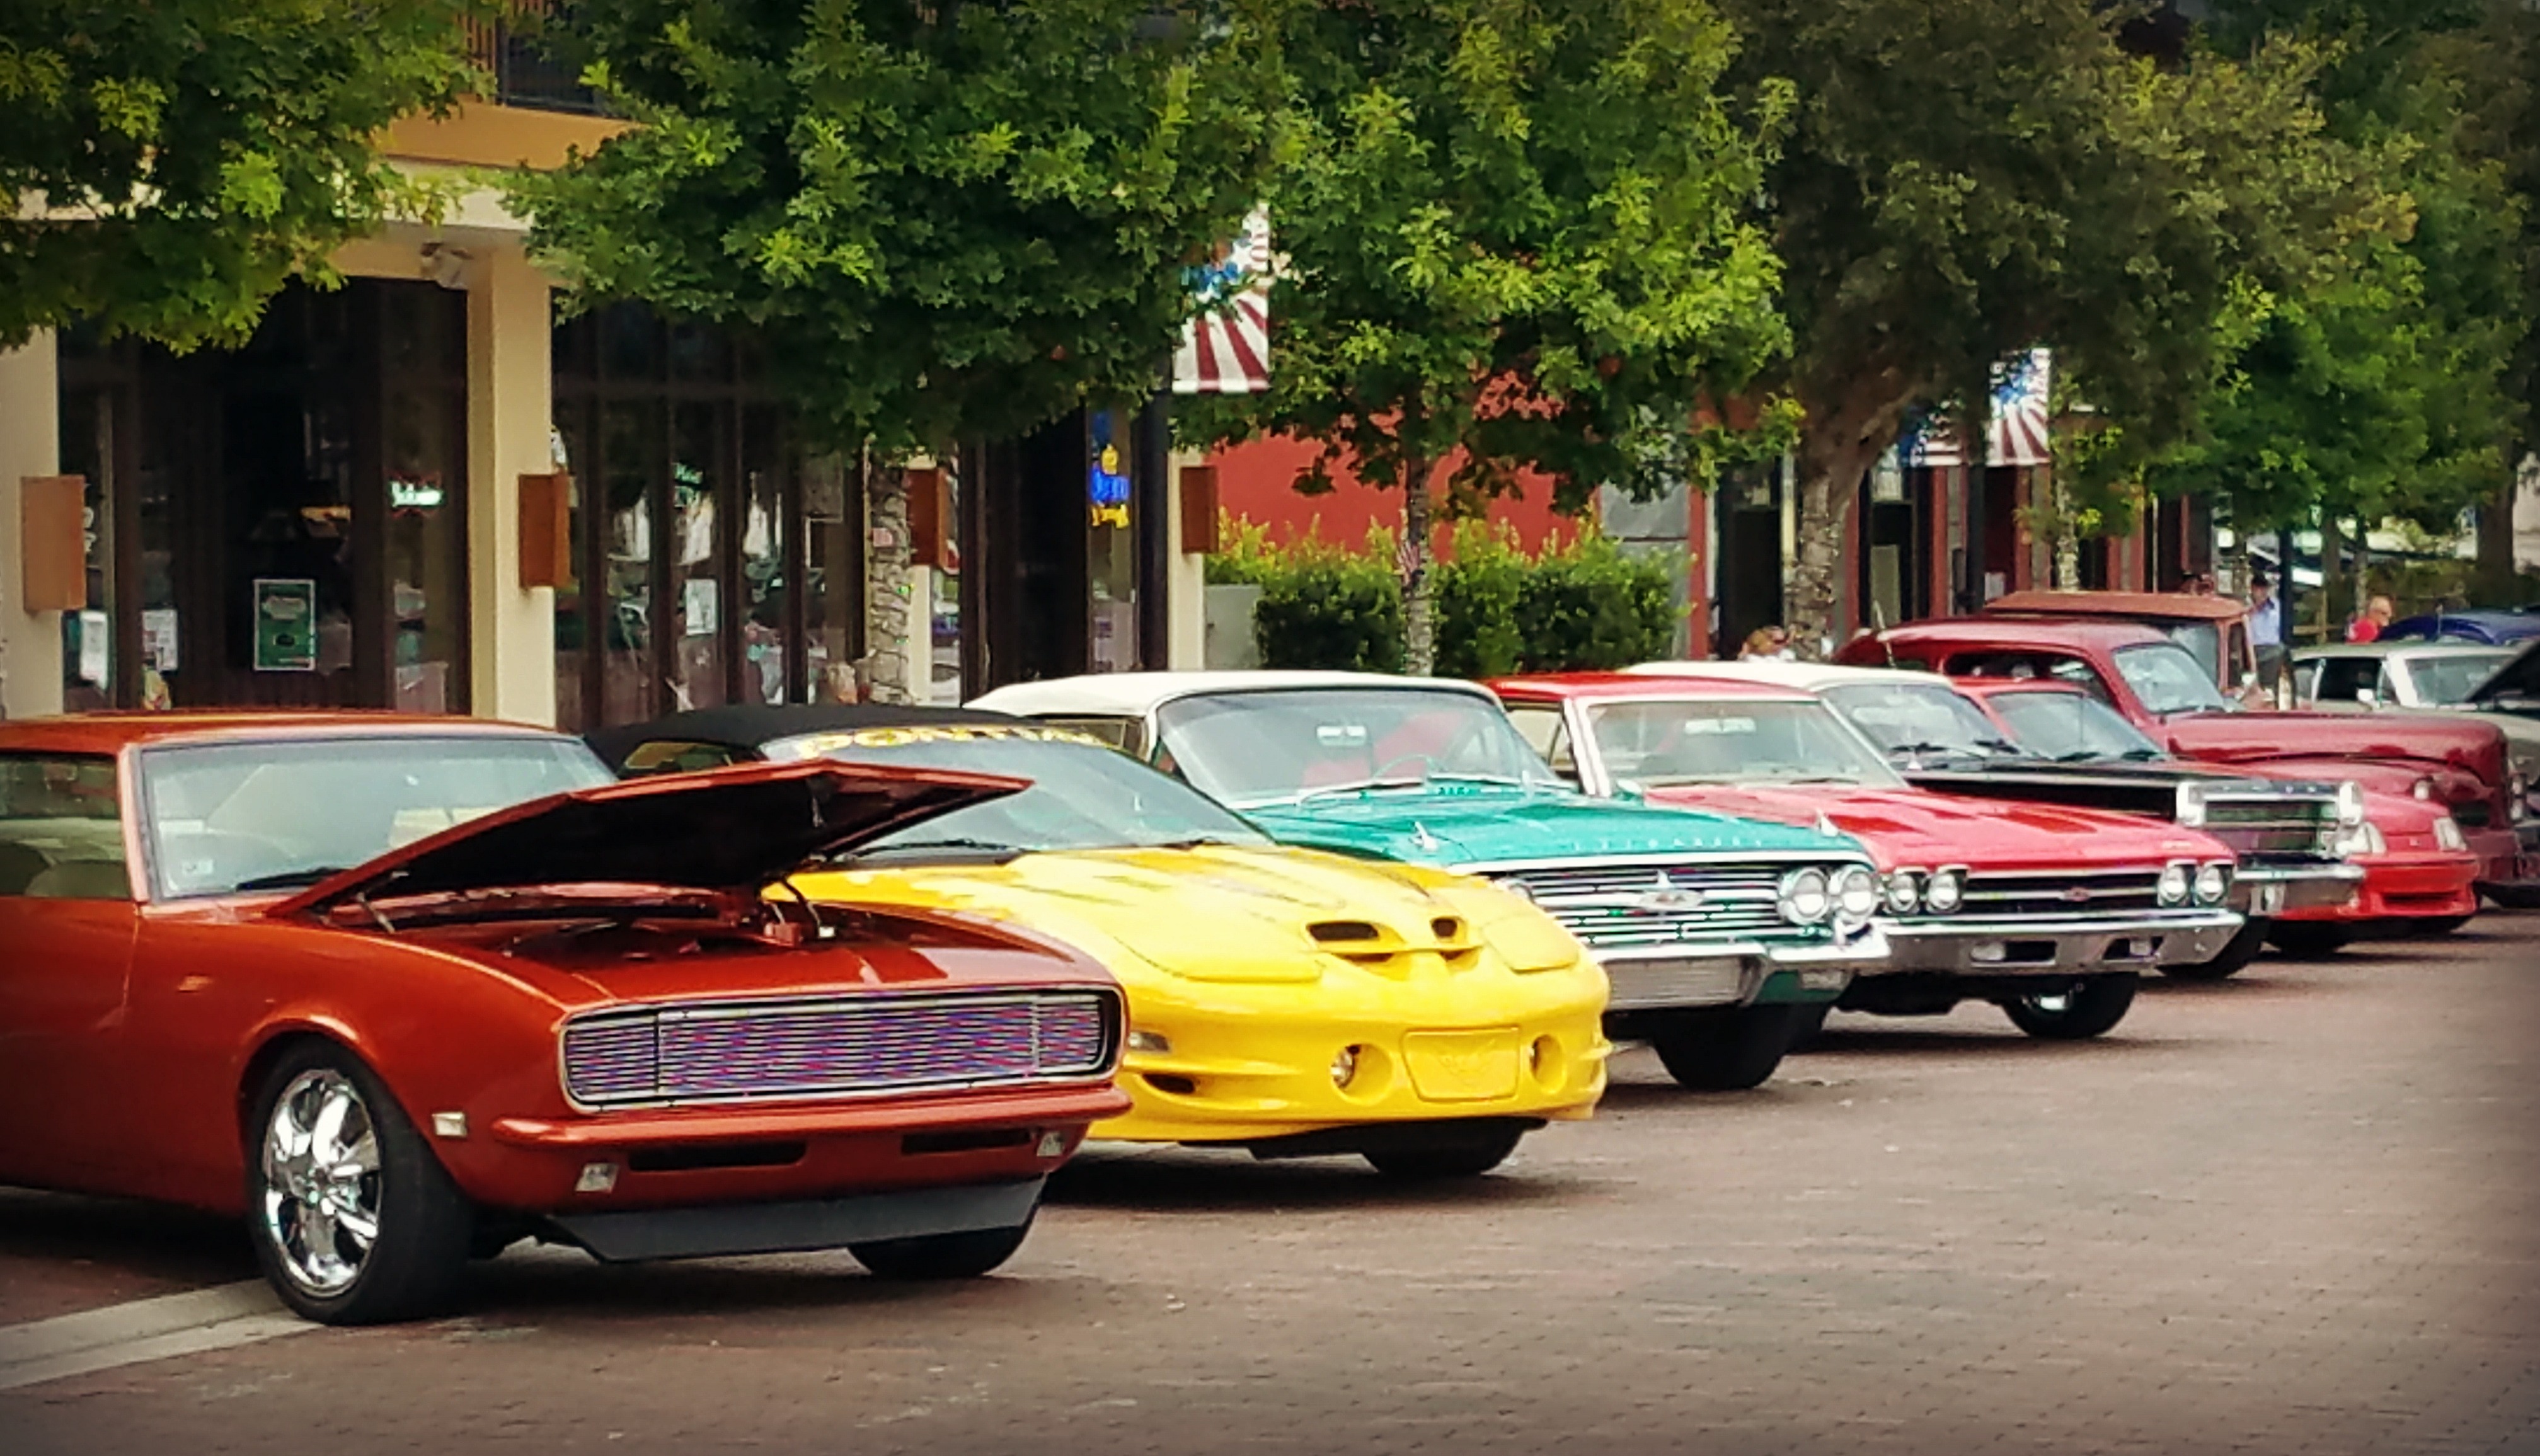 Classic Car Show Lined up outside in downtown Eustis 